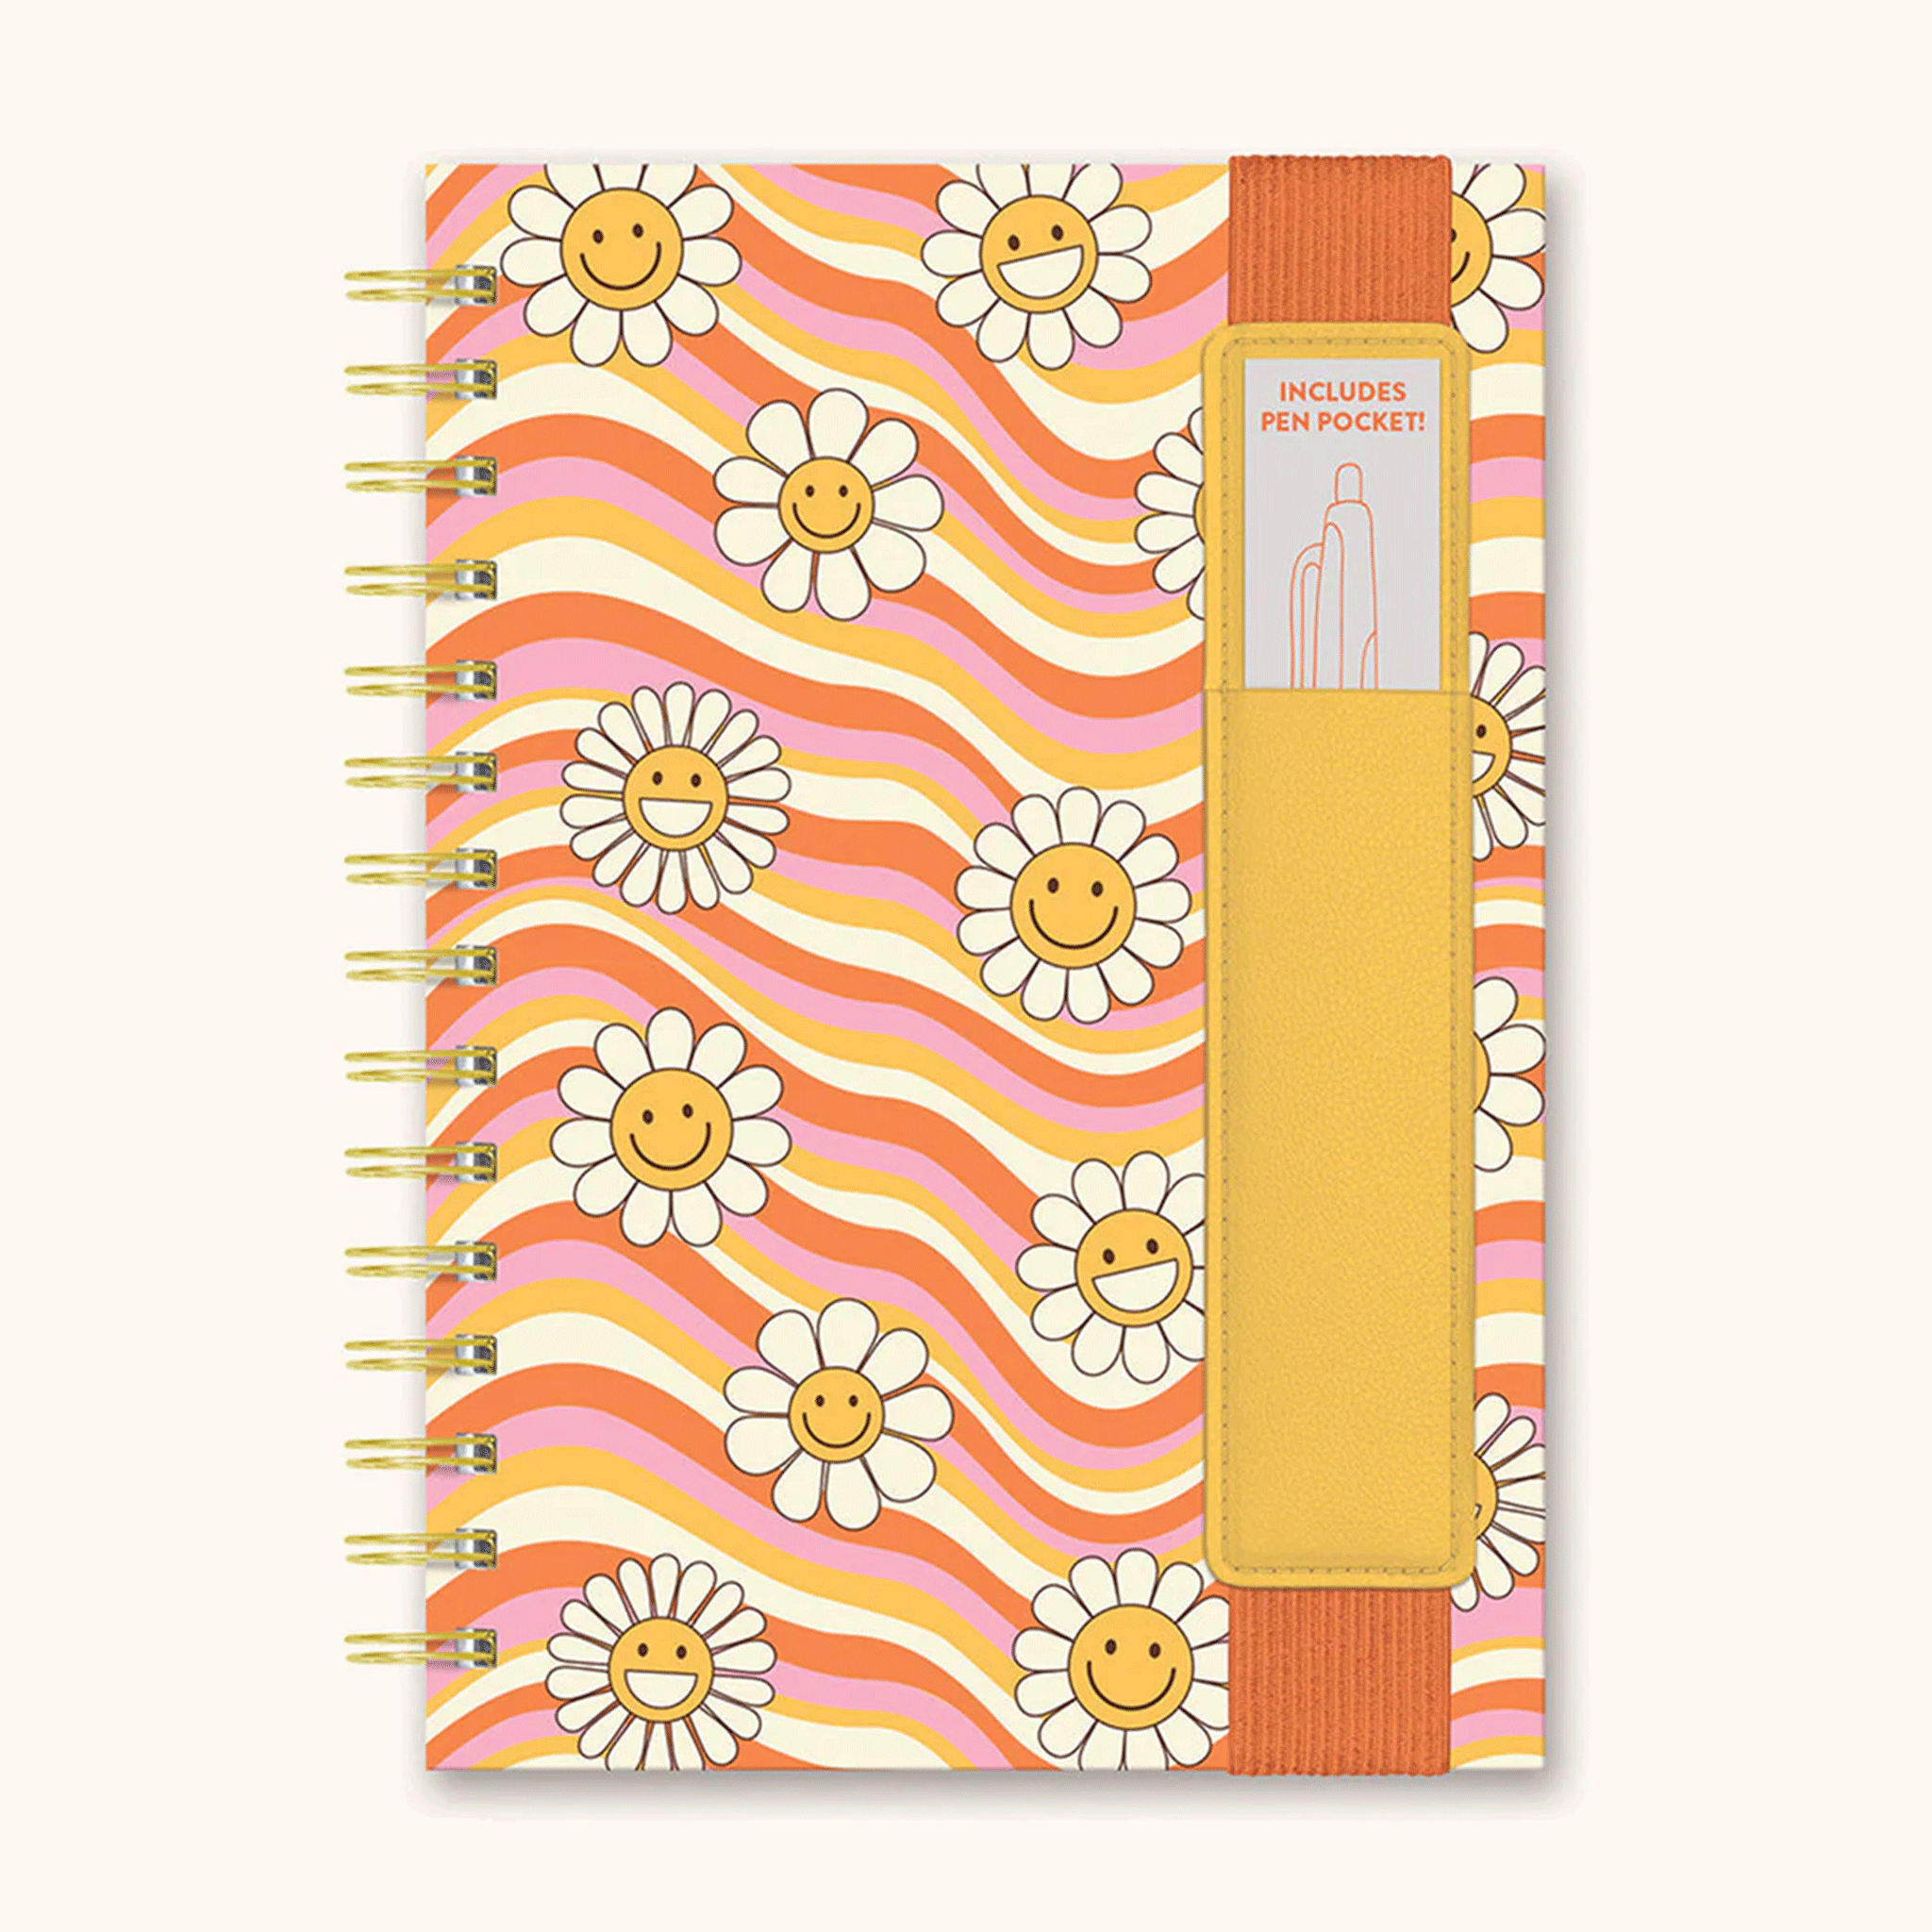 On a white background is an orange, yellow and pink wavy designed notebook with smiling daisies and a pen pocket. 